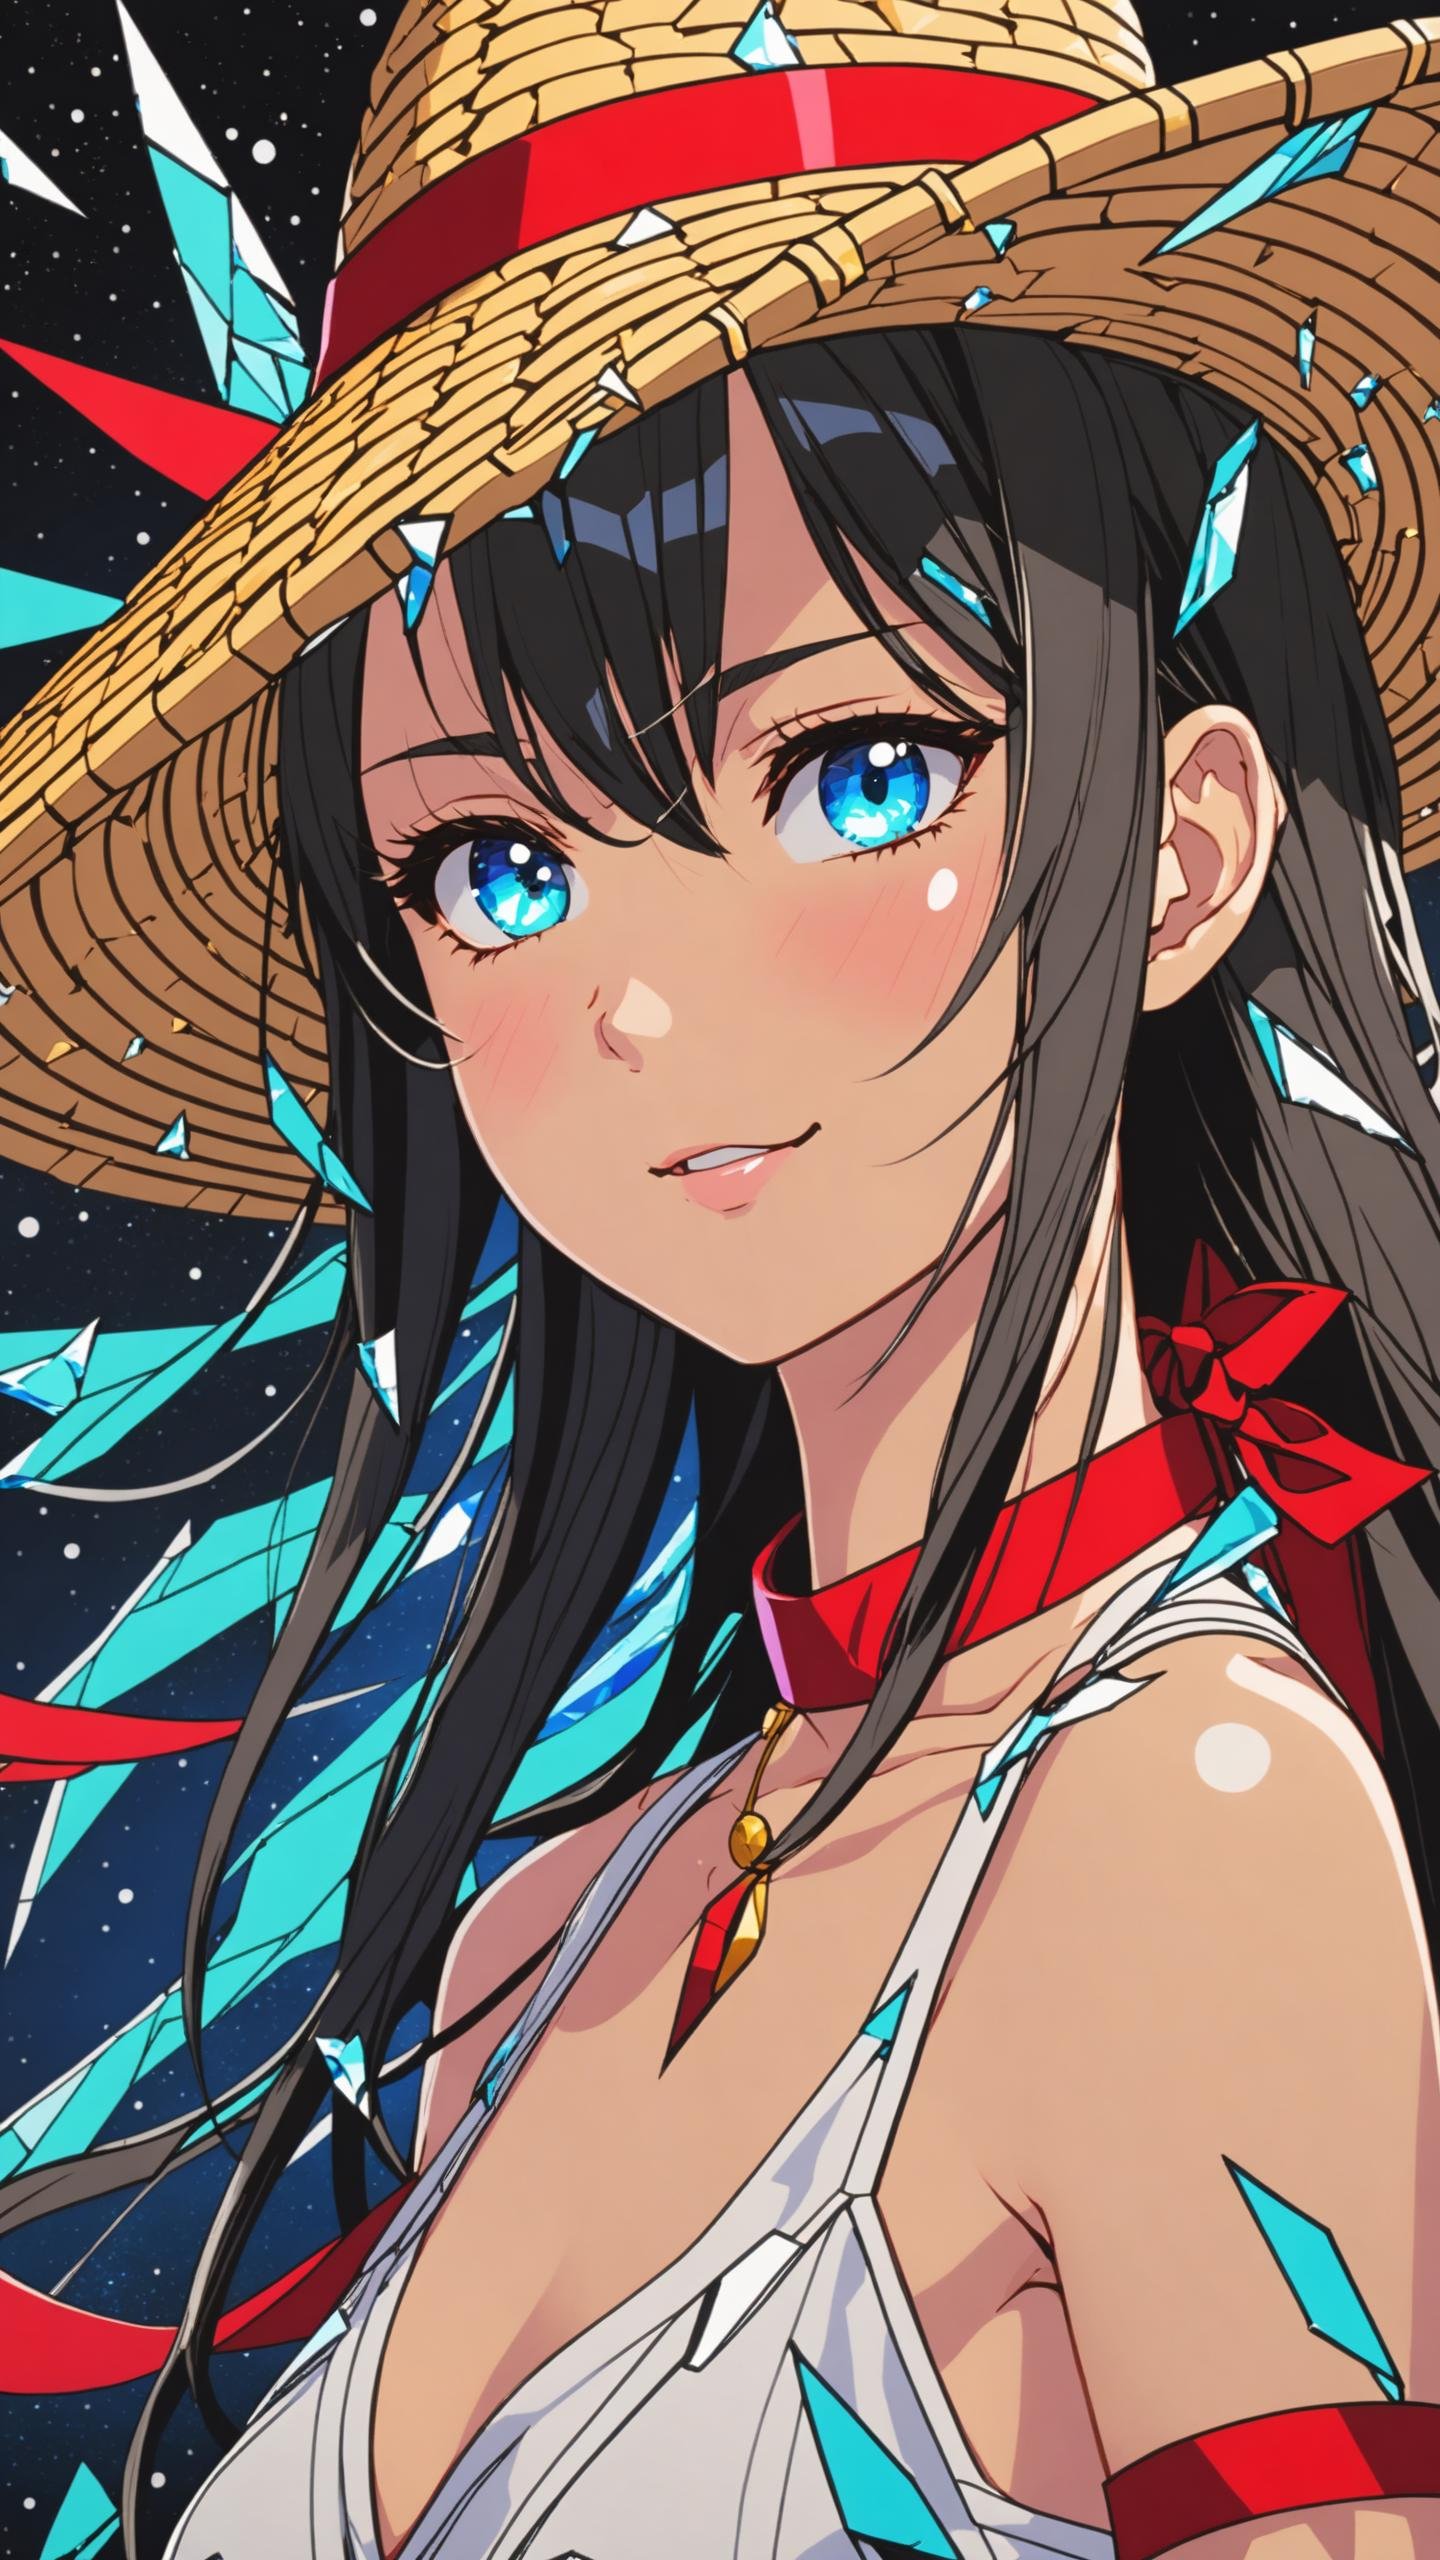 1girl, teen, (white camisole dress, straw hat, red sash belt:1.5), (cute face, sweet, smile, bare face, big eyes, open mouth:1.4), face closeup, black glitched hair, straight hair, long hair, cowboy shot, (dynamic pause, dynamic angle, walk on sandy beach, blue sky, white cloud, blue sea:1.3), japanese, japanese idol succubus, black eyes, (best quality, ultra high res, Realistic, RAW photo, portrait photography, photorealistic, detailed skin, fair skin, beautiful detailed eyes), neon lit broken glass in shape of woman, galactic canvas shattered hopes and dreams, crystalline breakage, cracks in the fabric of space, crystalline eyes, strokes of art, sharp edges and lines, artistic, neon colors, colorful, sharp, inter-dimensional cracks, limitless faults in the data, curved cracks, fragmented, breaking off, pieces of nature, fragments of destruction, fragments of dreams, story told in art, ultra detailed, intricate, masterpiece, best quality, detailed, highest quality, highest details, highres, vortex dream, cosmic color splash artwork, (opal chatoyance cloud background:1.2), trendy, wins awards, ultra HD, Panavision Millennium DXL2 8k, large format, 5K Super 35, true 4K anamorphic, realistic photo